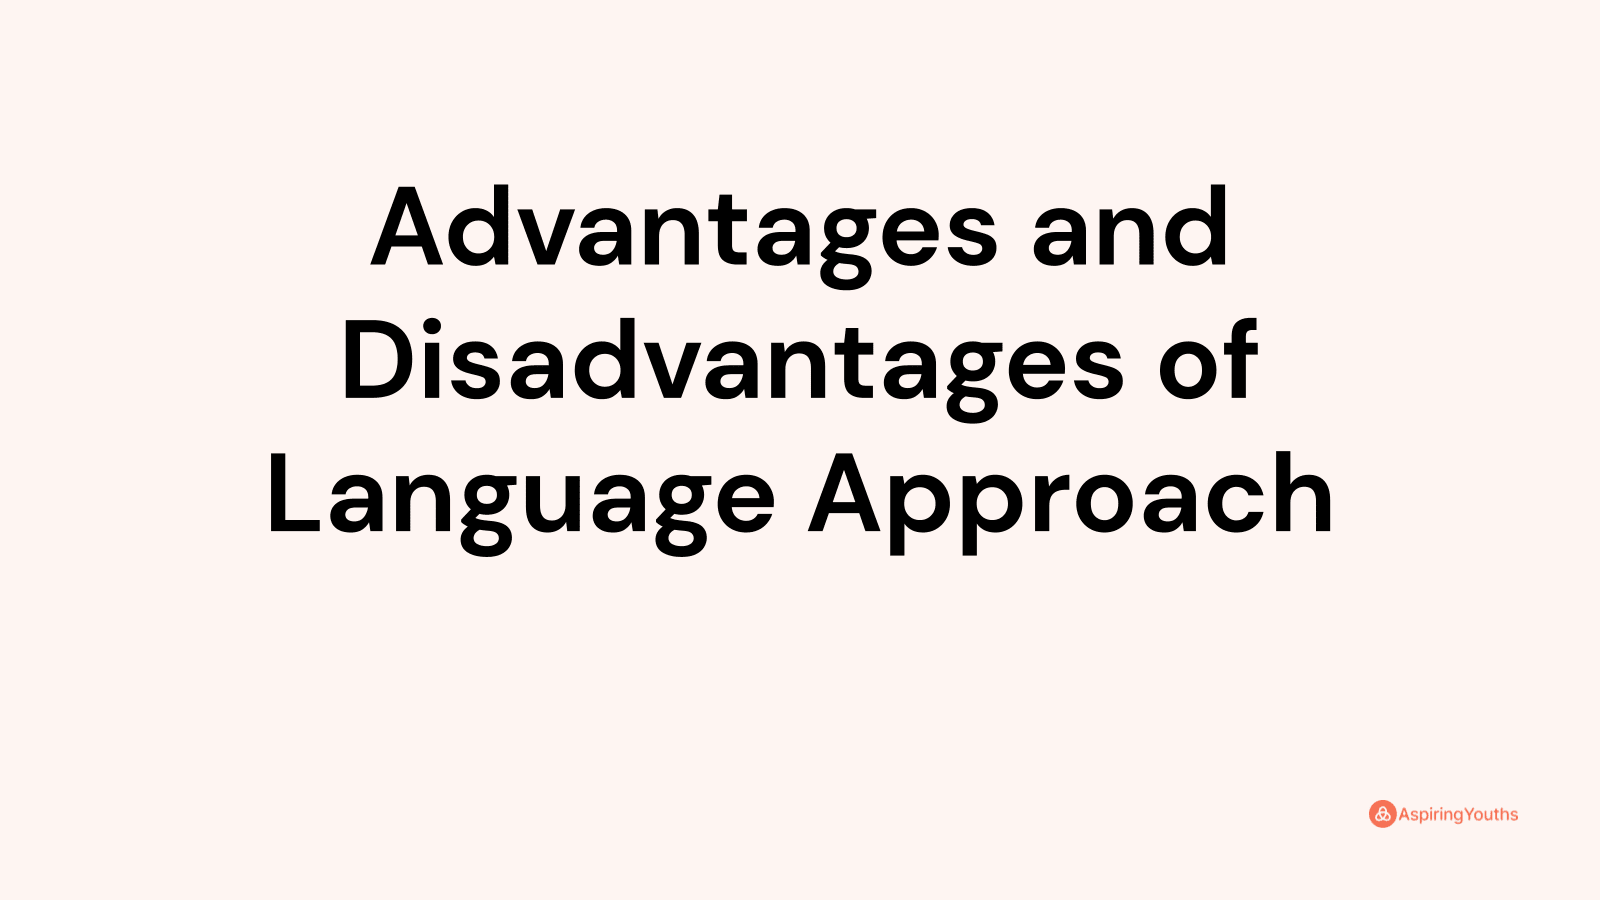 Advantages and disadvantages of Language Approach